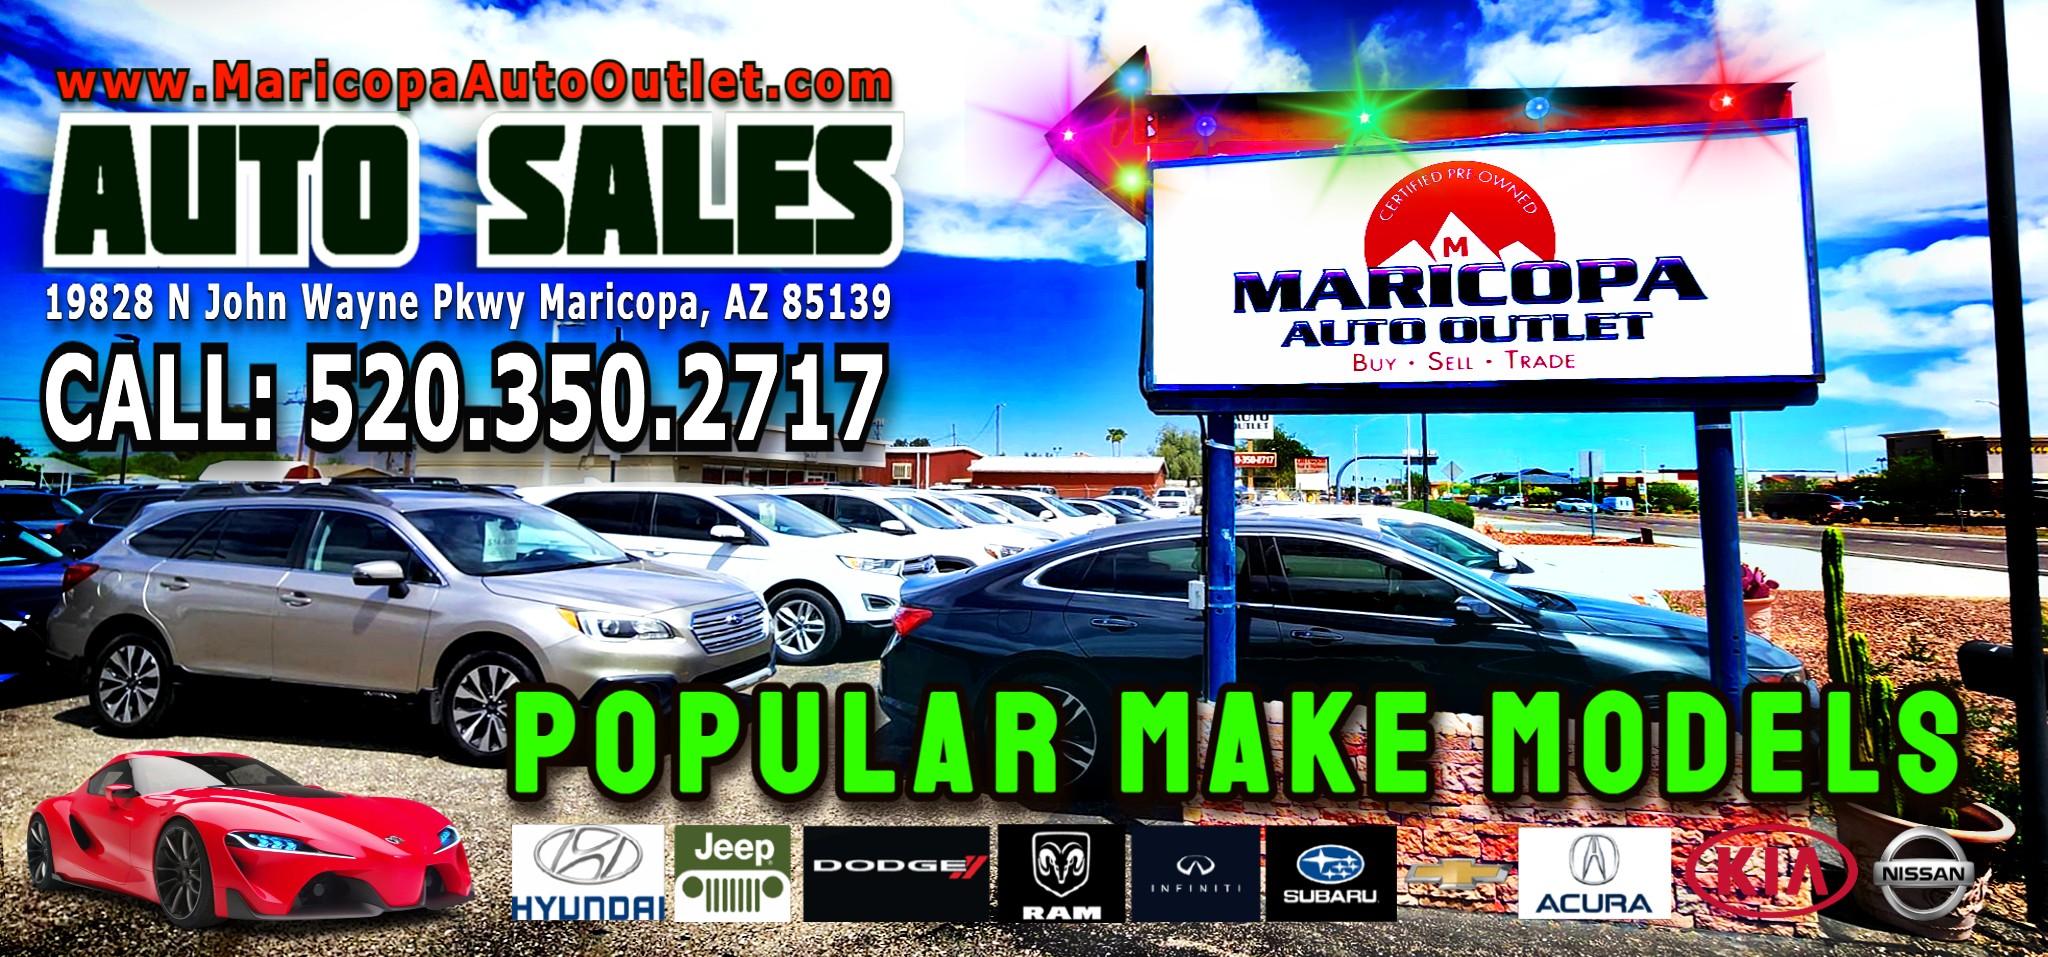 Maricopa auto outlet